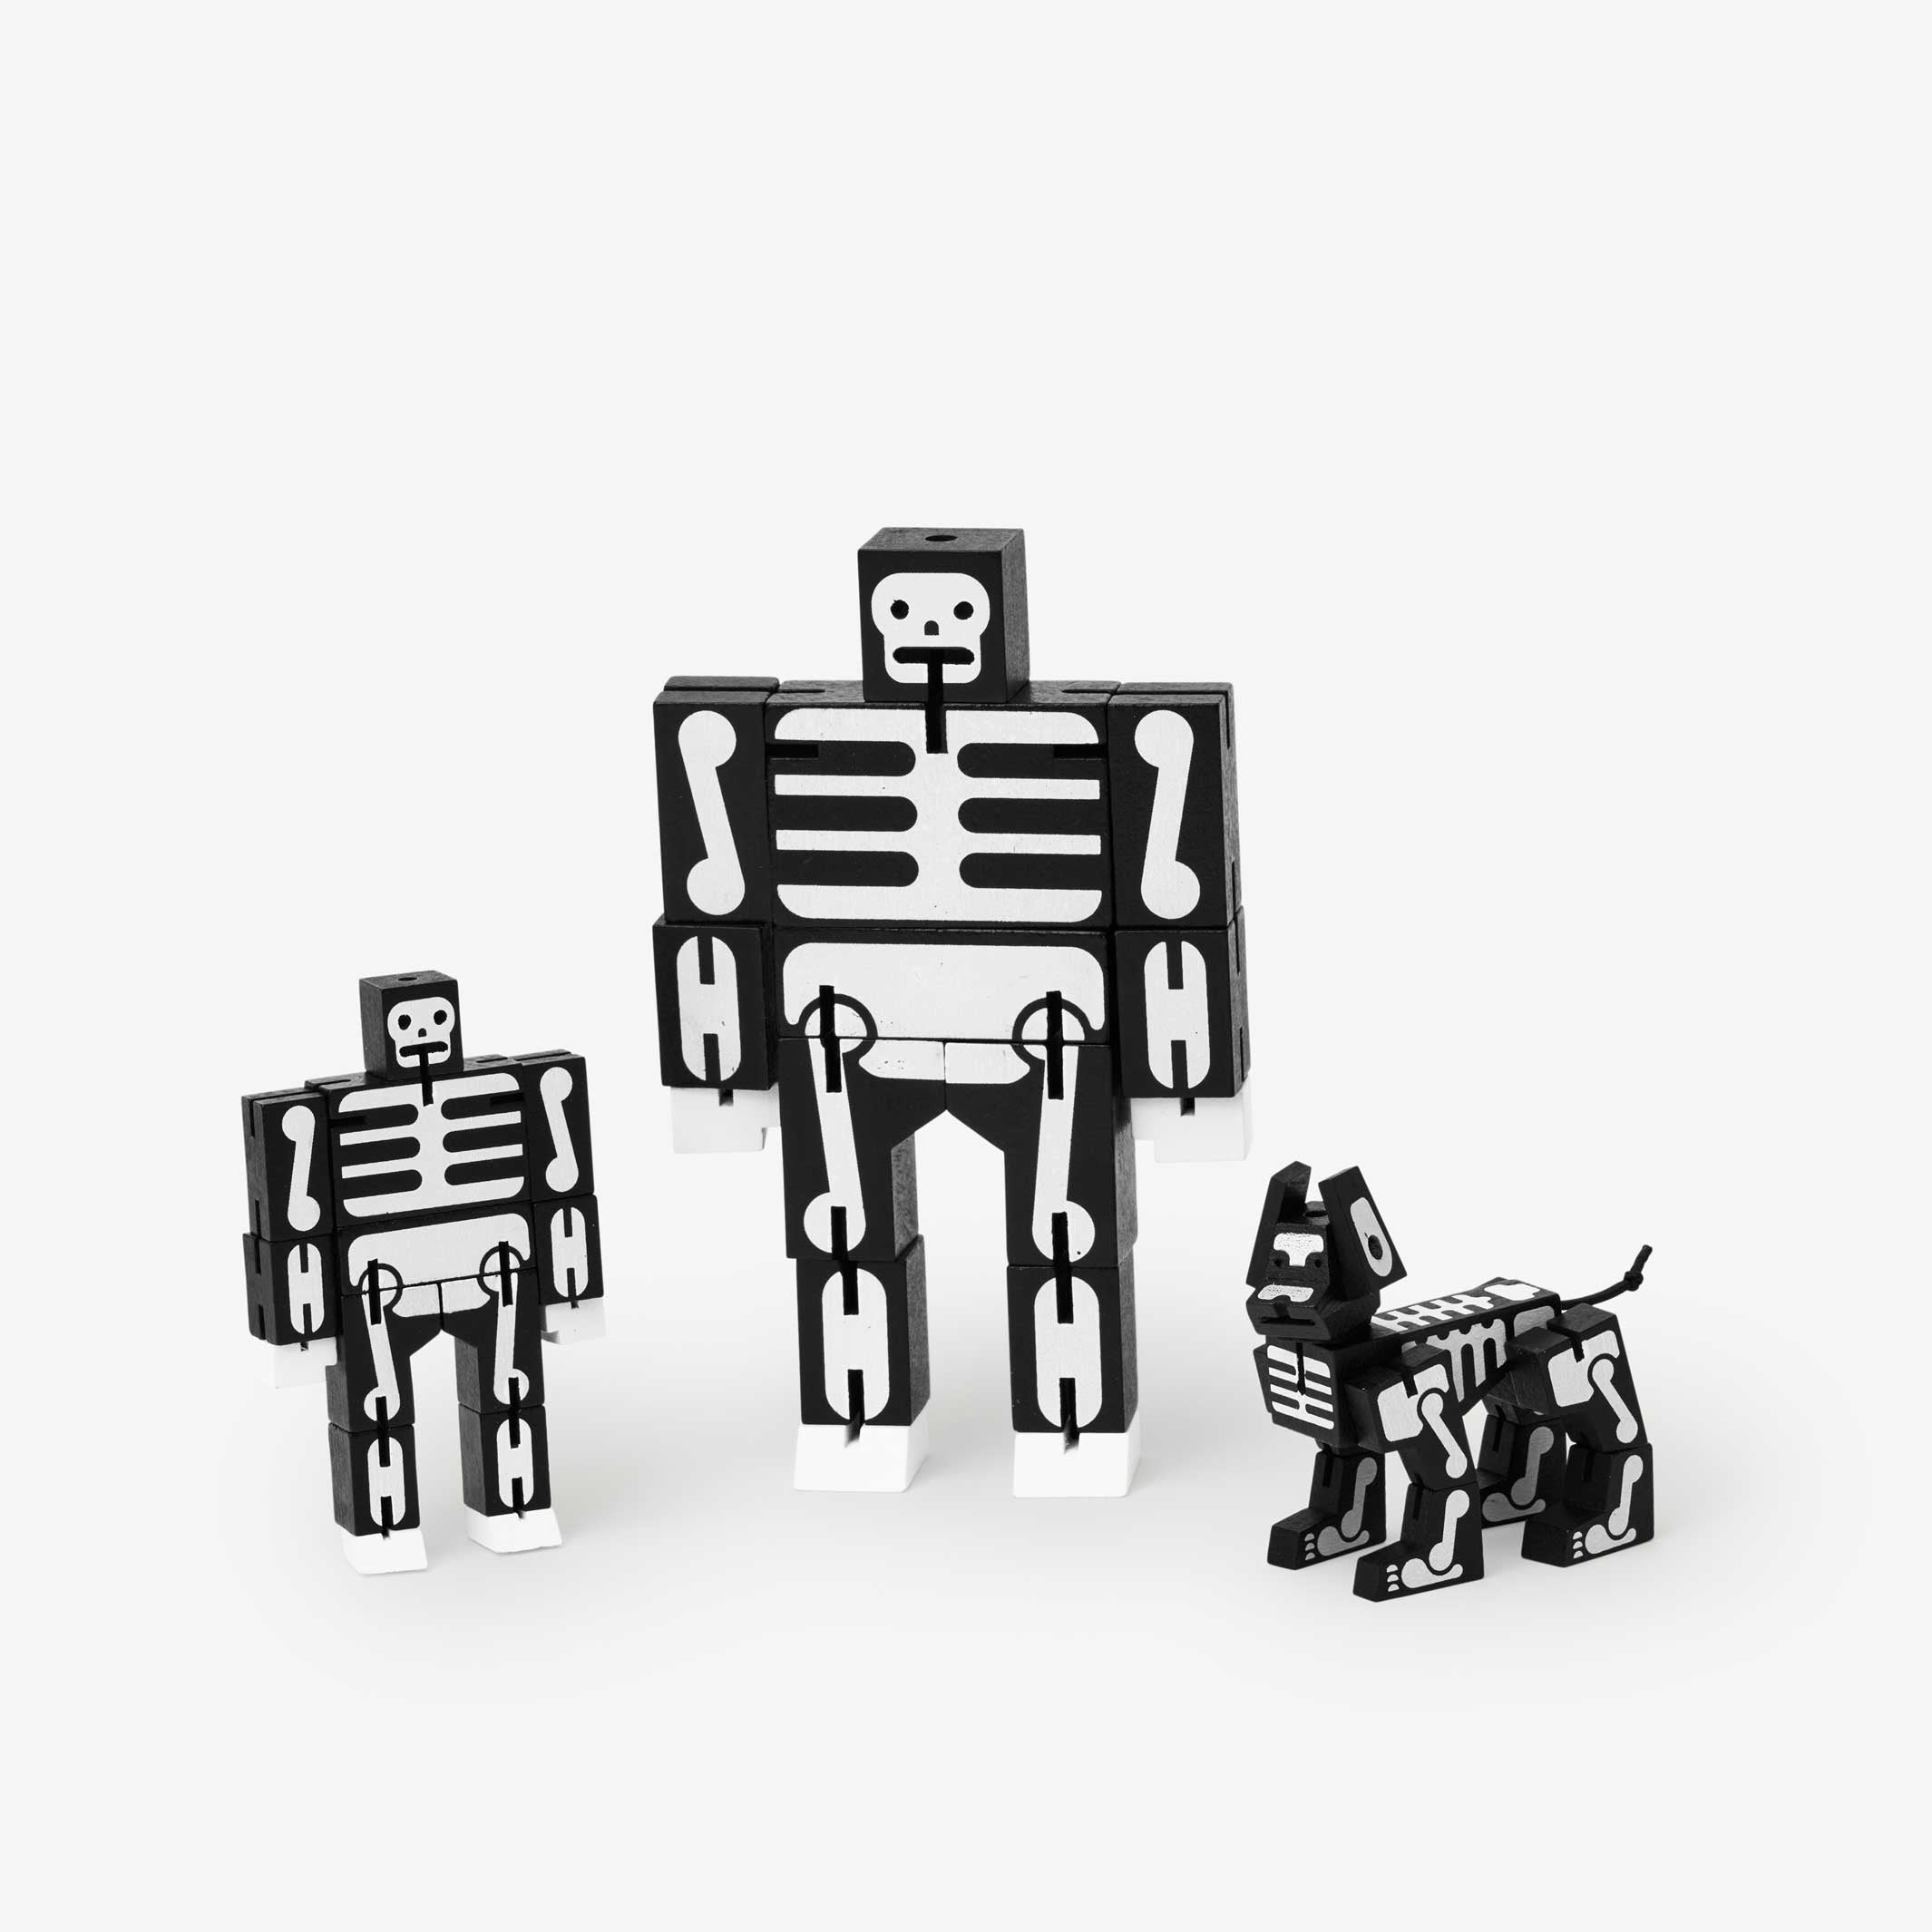 CUBEBOT® Small SKELETT | 3D PUZZLE ROBOTER | David Weeks | Areaware